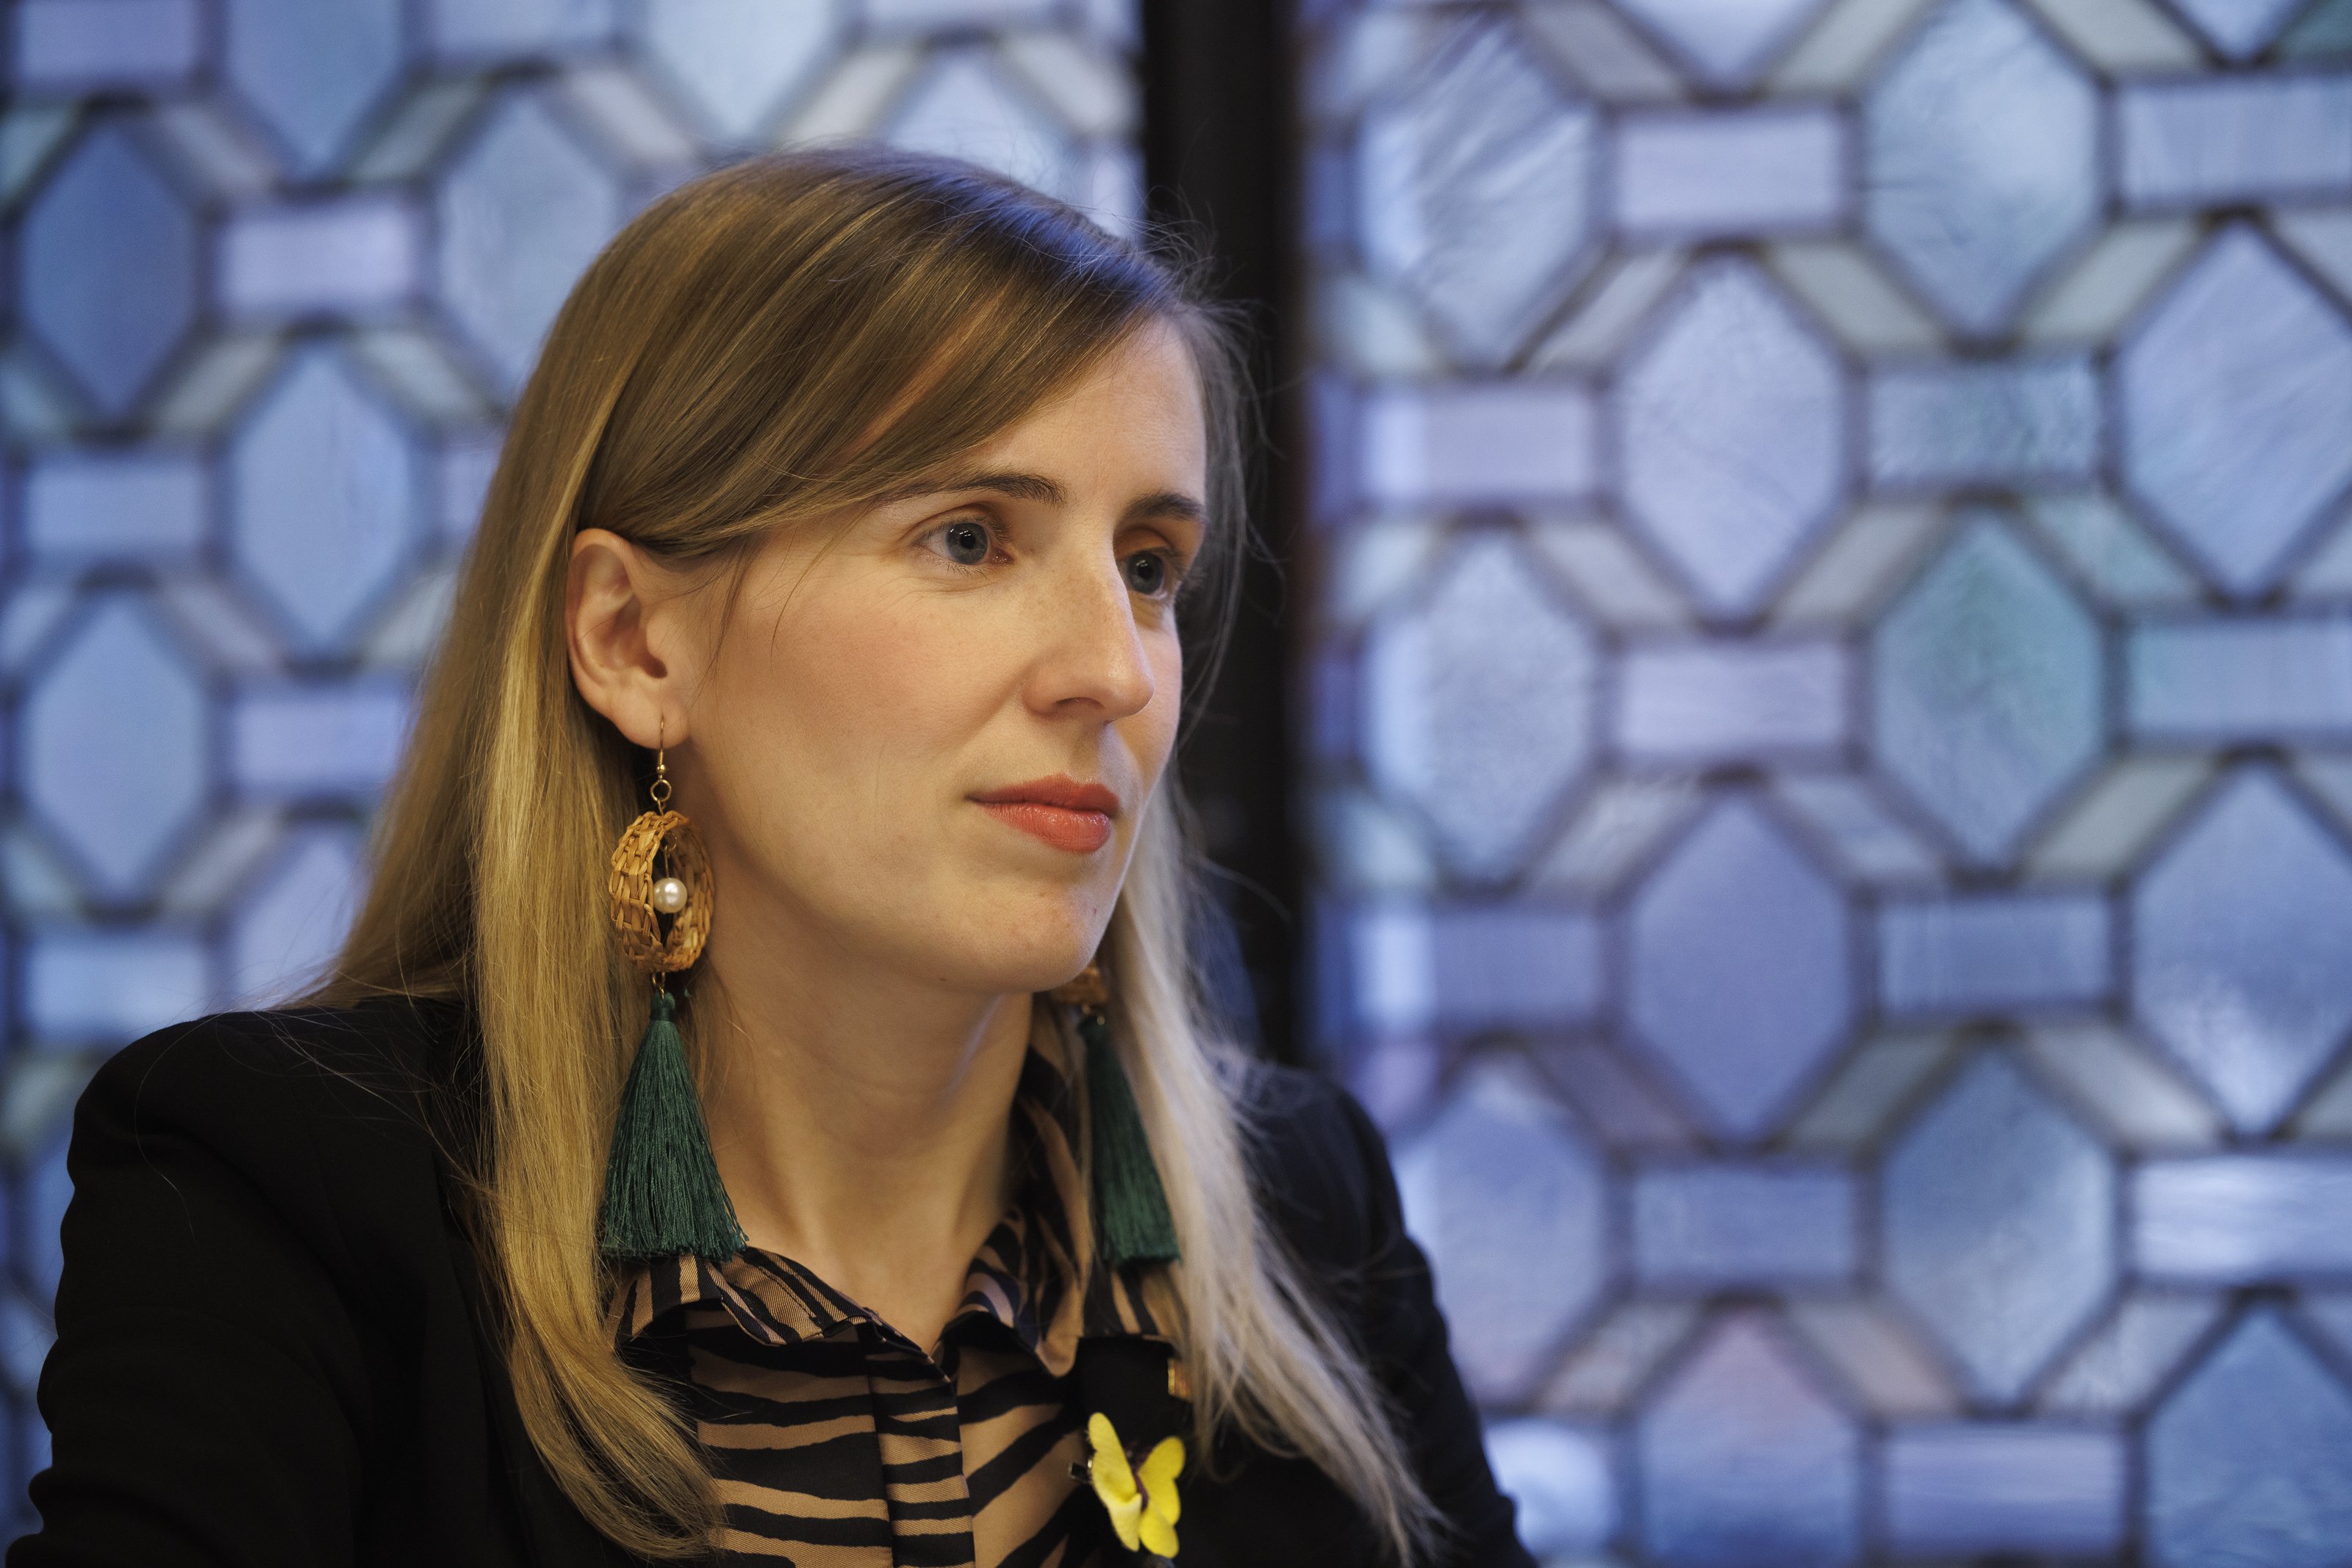 Victòria Alsina: "It's easier to act as opposition to ERC within the Catalan executive"